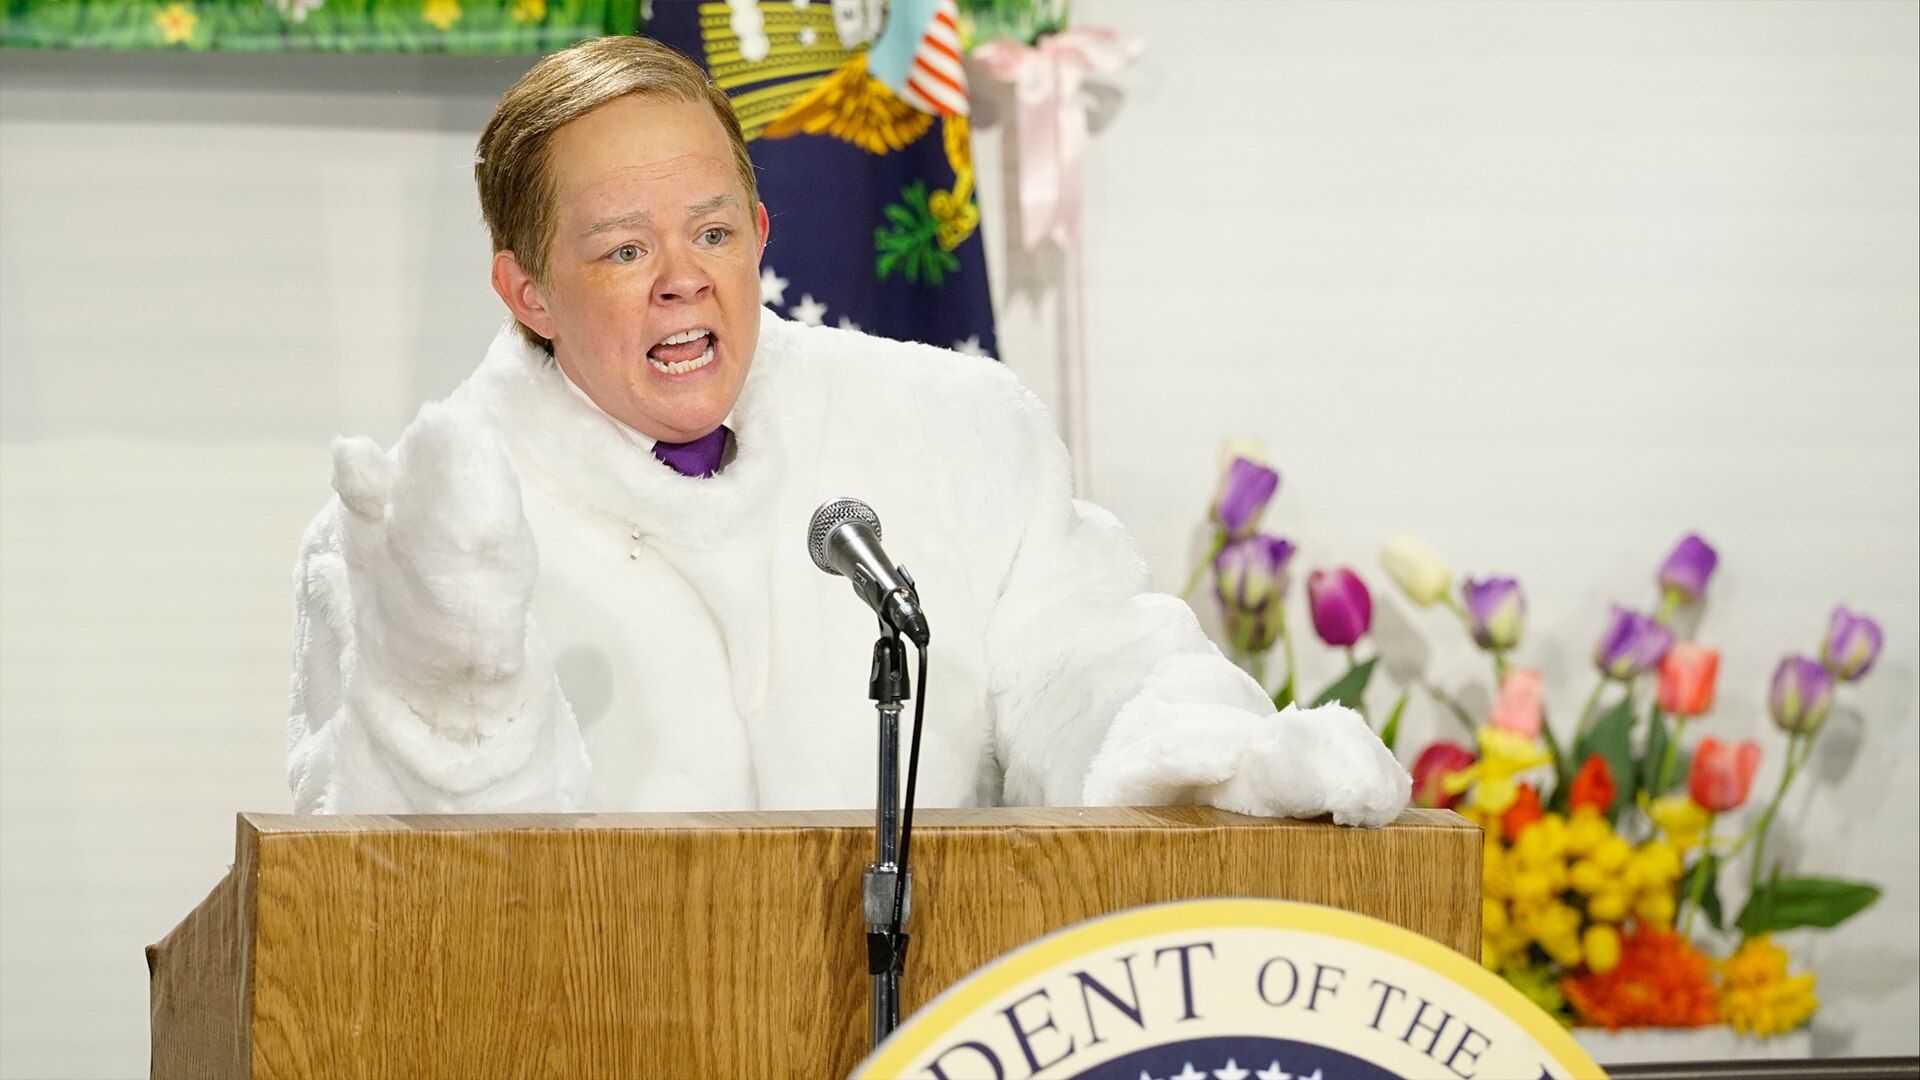 Watch Saturday Night Live Highlight Easter Message from Sean Spicer